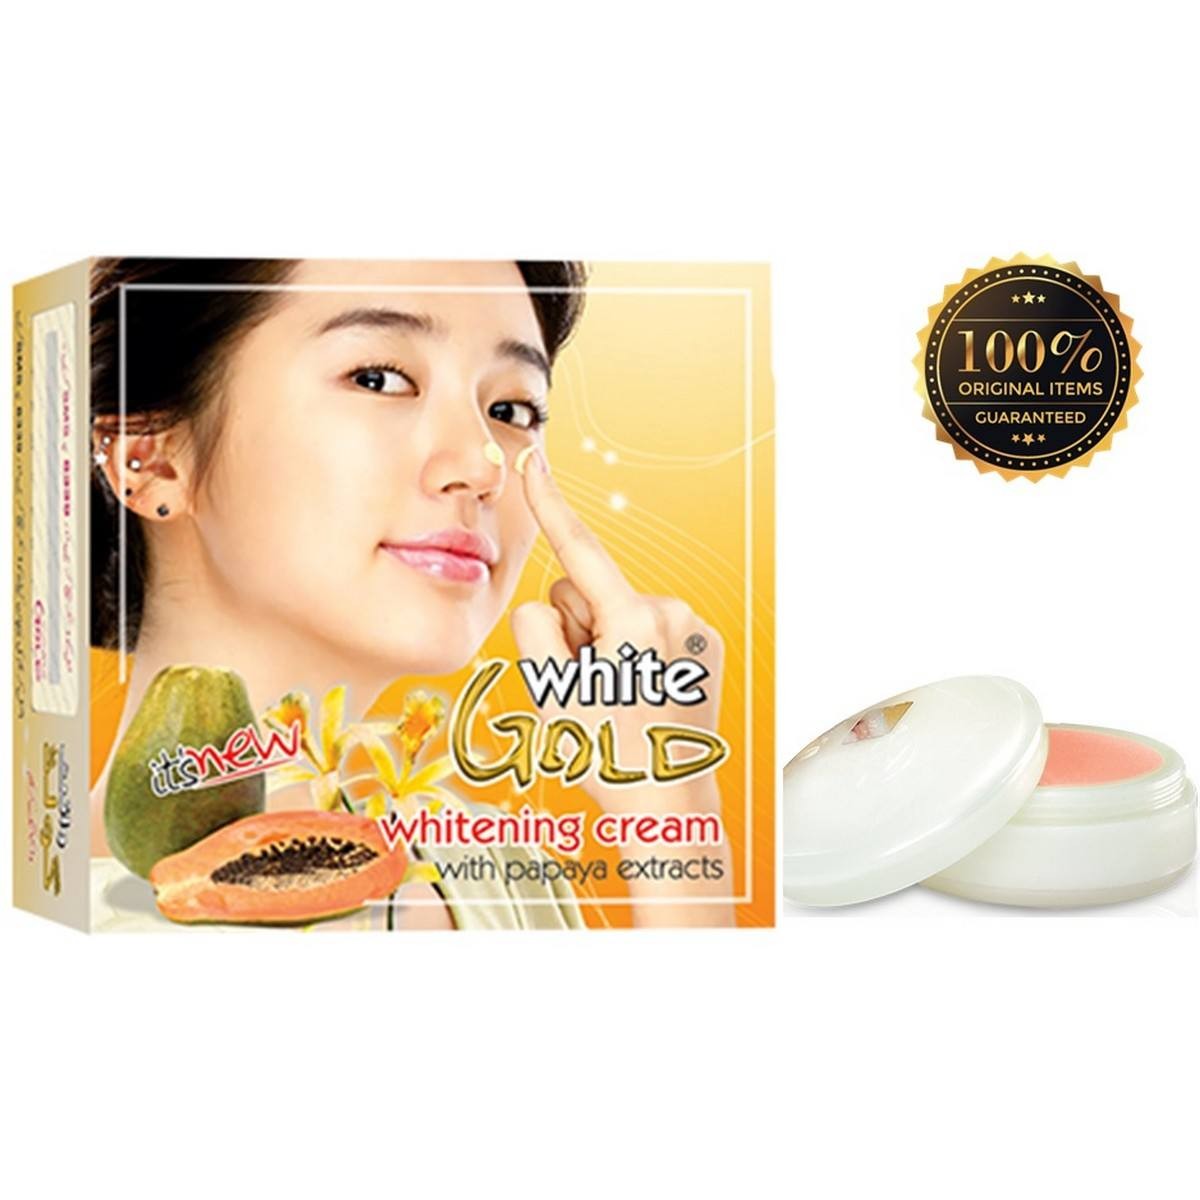 White Gold Beauty Cream 100% Original | With Papaya Extracts